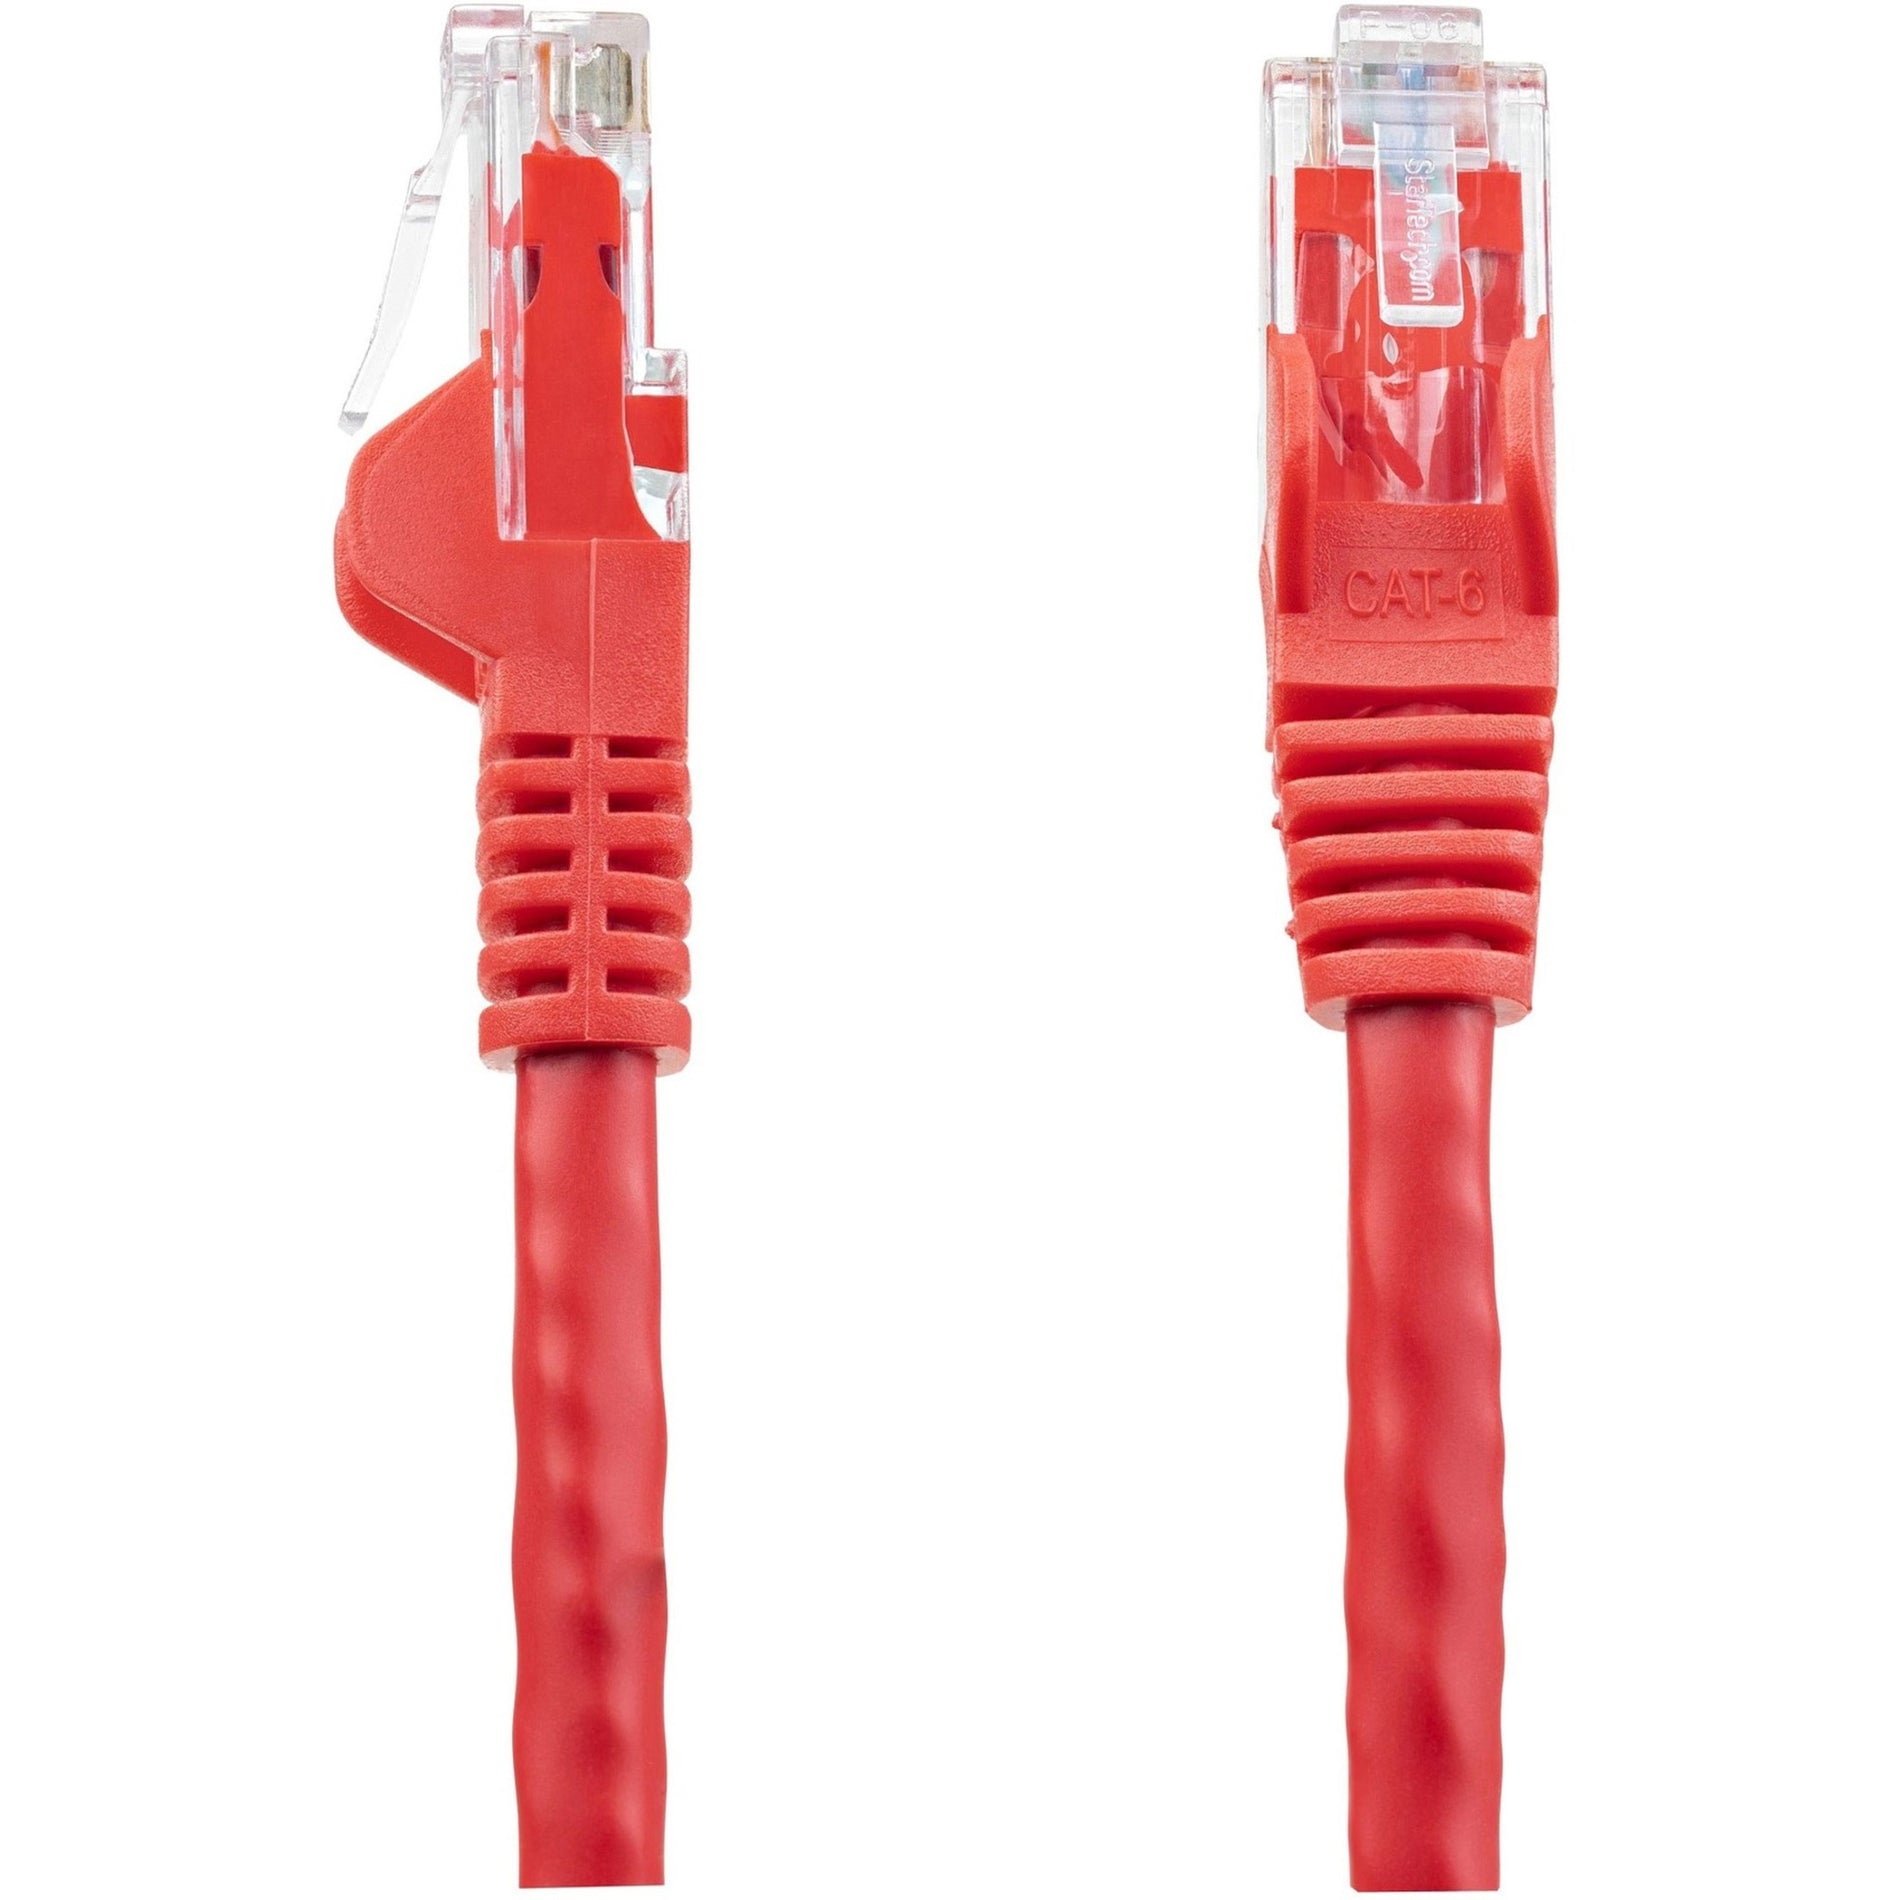 StarTech.com N6PATCH25RD 25 ft Red Snagless Cat6 UTP Patch Cable, 10 Gbit/s Data Transfer Rate, Lifetime Warranty